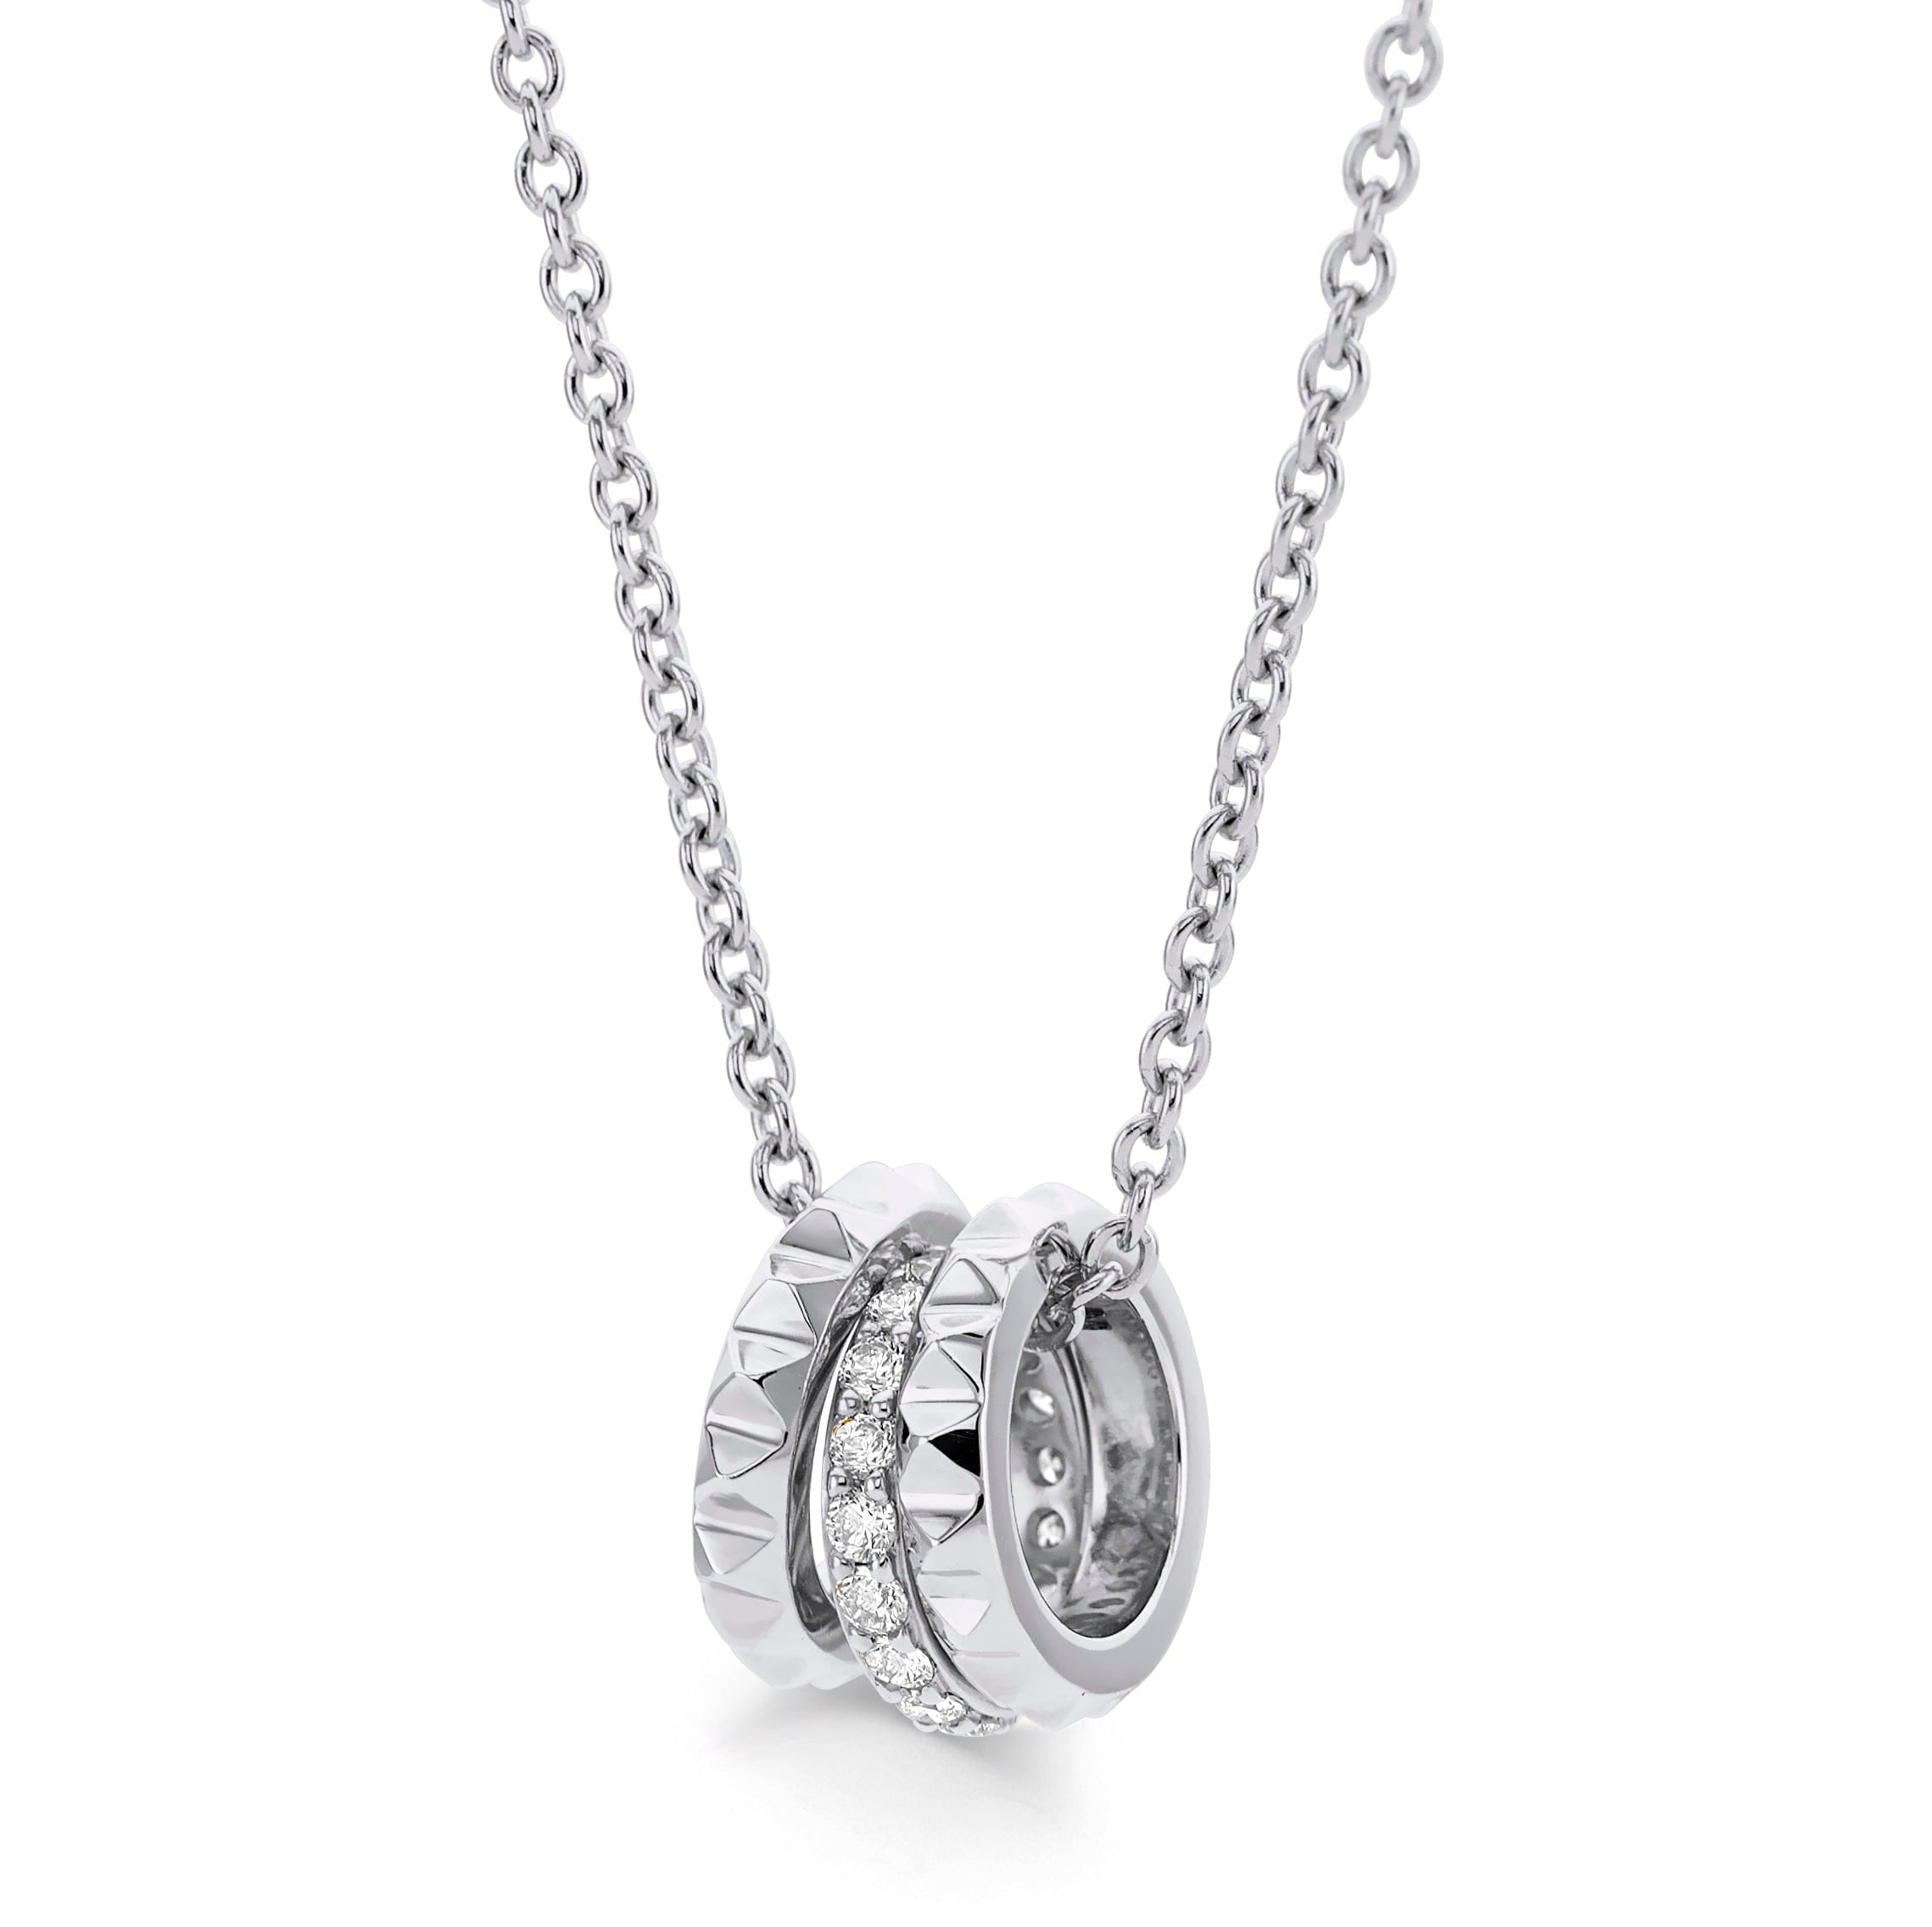 MICHAEL M Necklaces Tetra 3 Ring Necklace